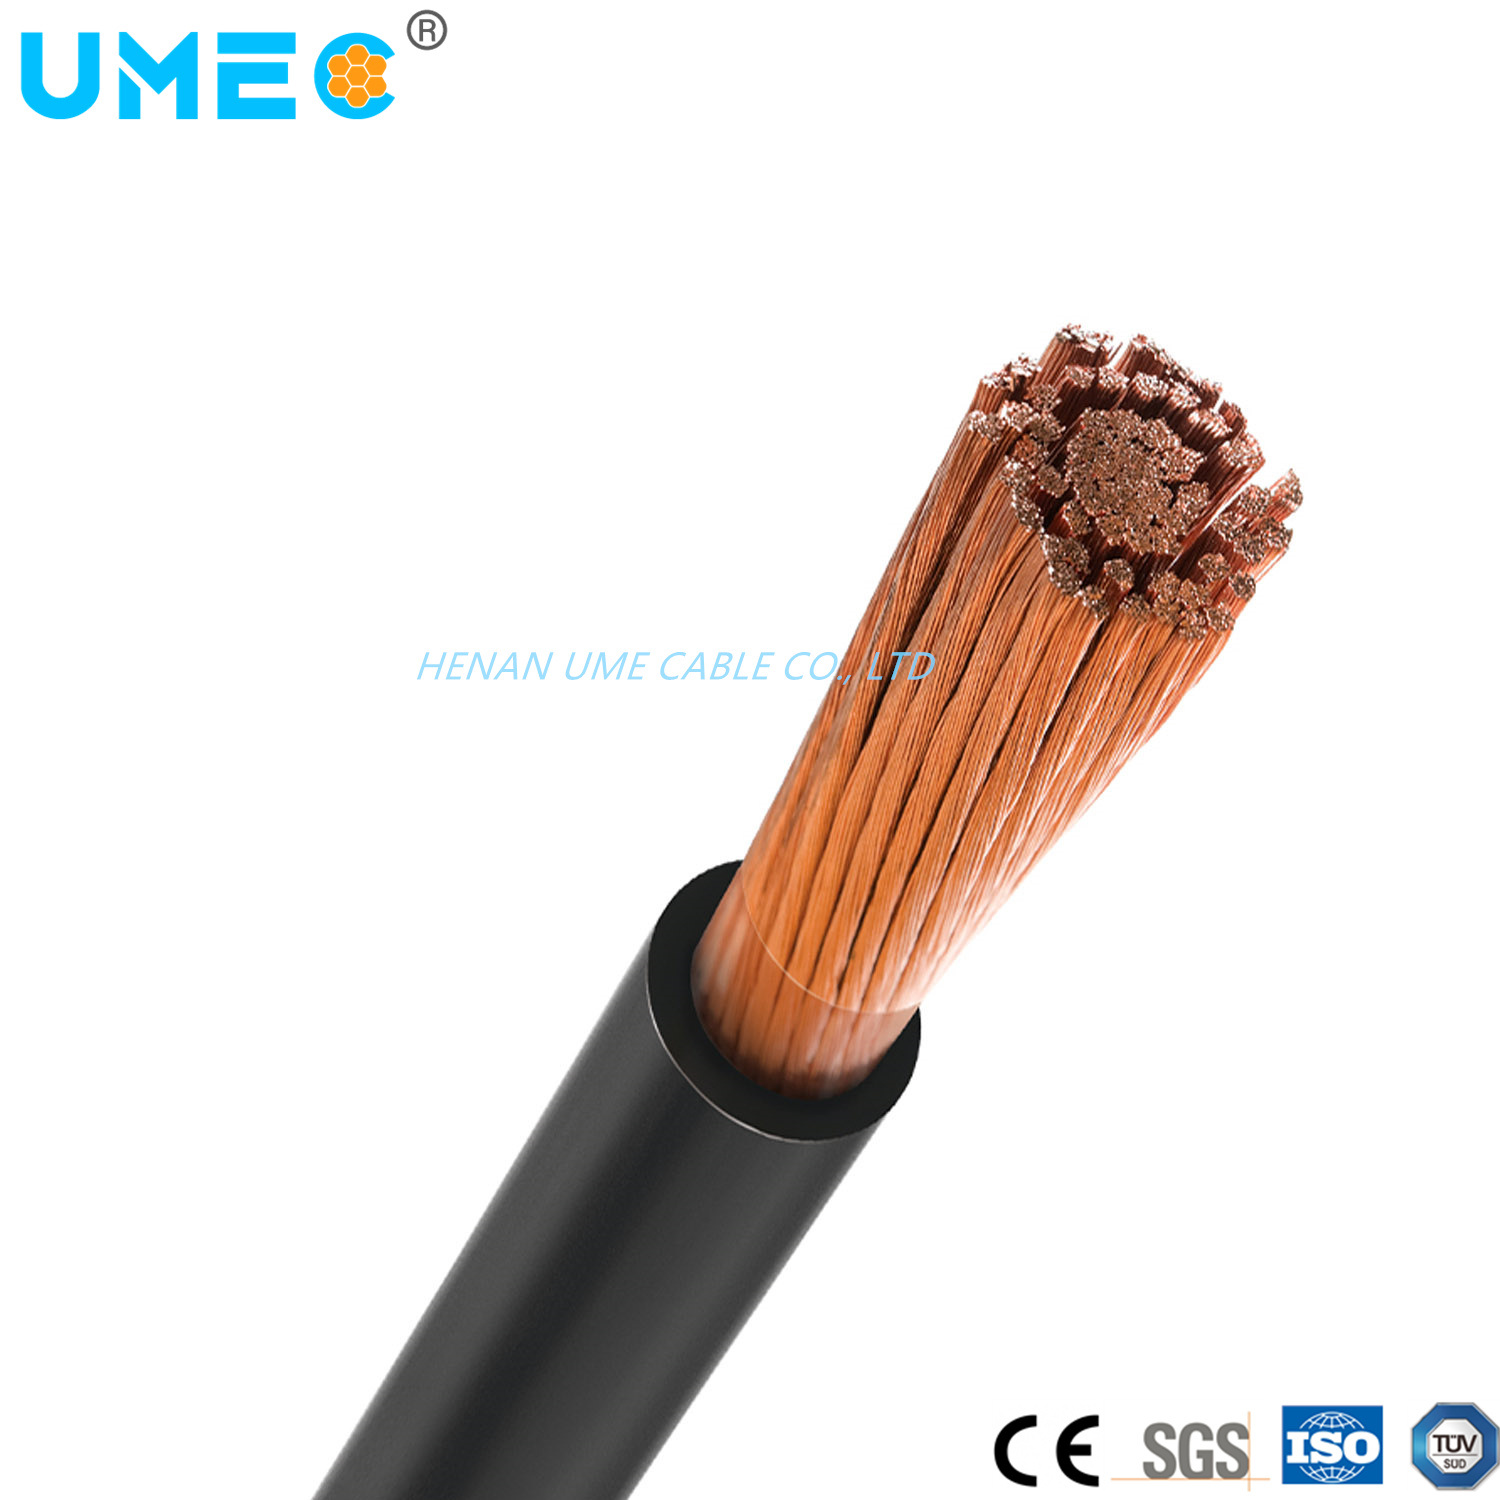 Electrical Wholesale Welding Cable 300 AMP High Flexibiiity Oil Resistant, Flame Resistant and Wear-Resistant 25mm2 Electrical Cable